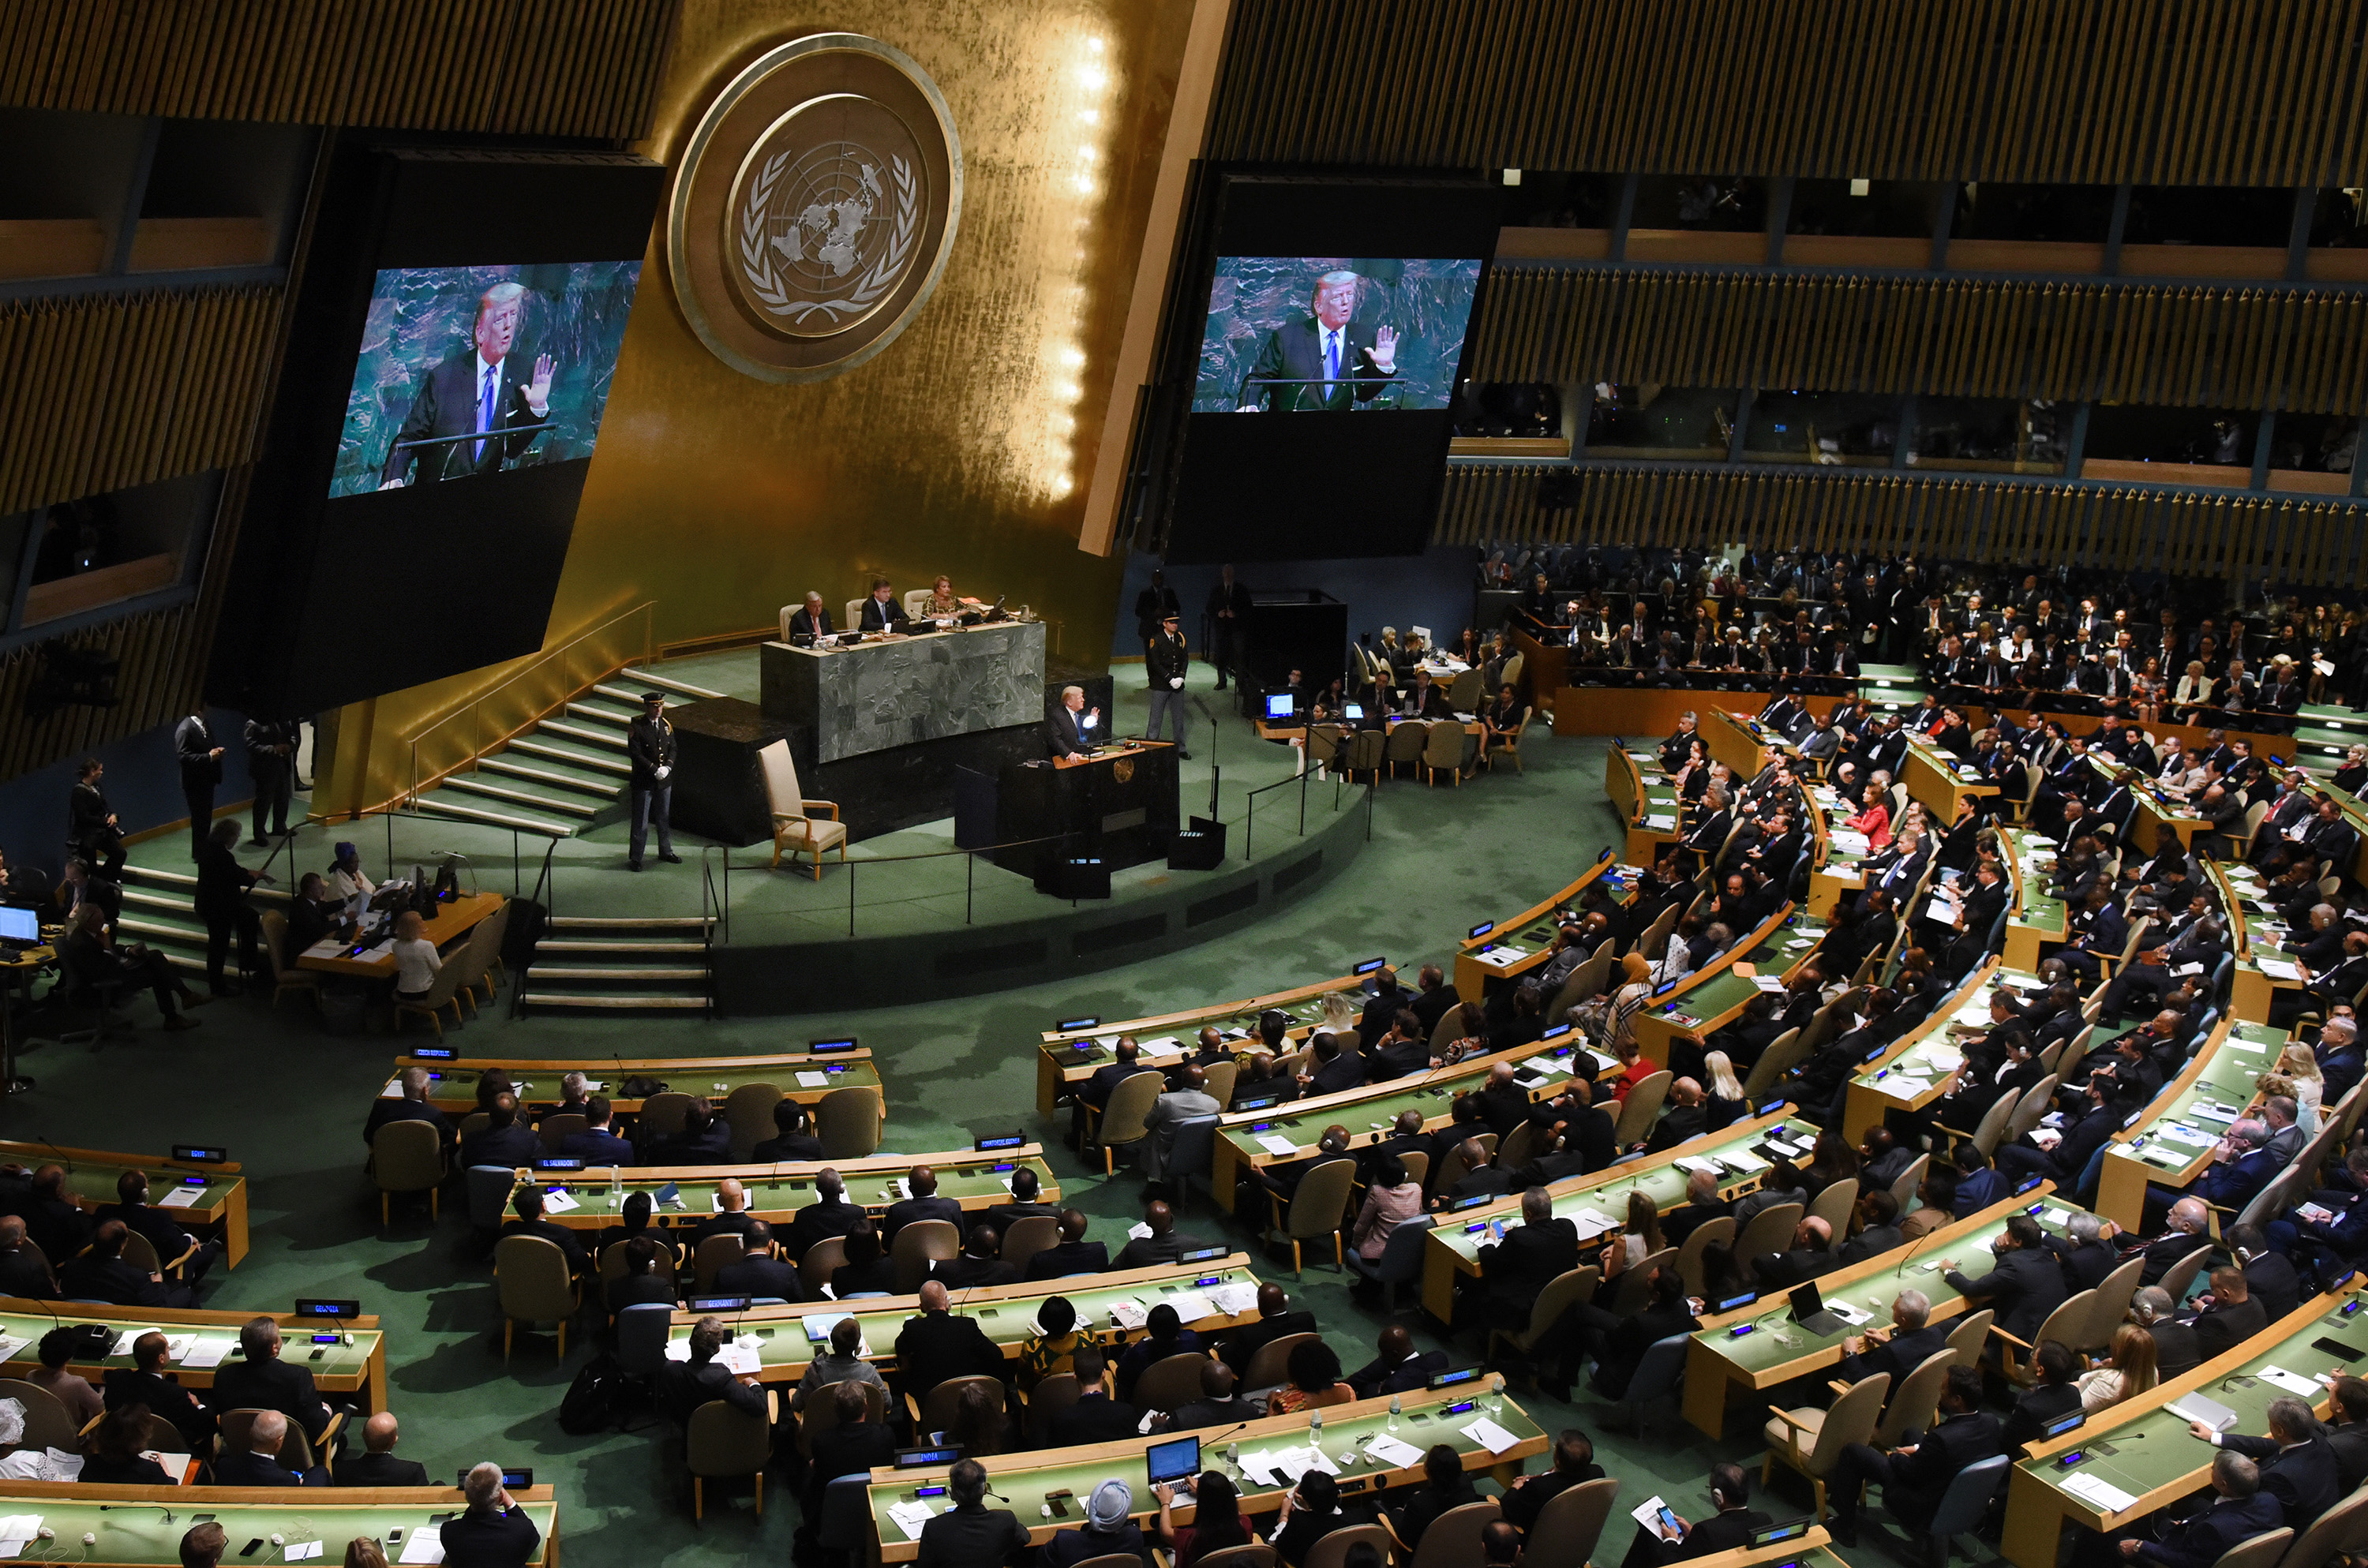 72nd assembly of the United Nations The Eagle Eye